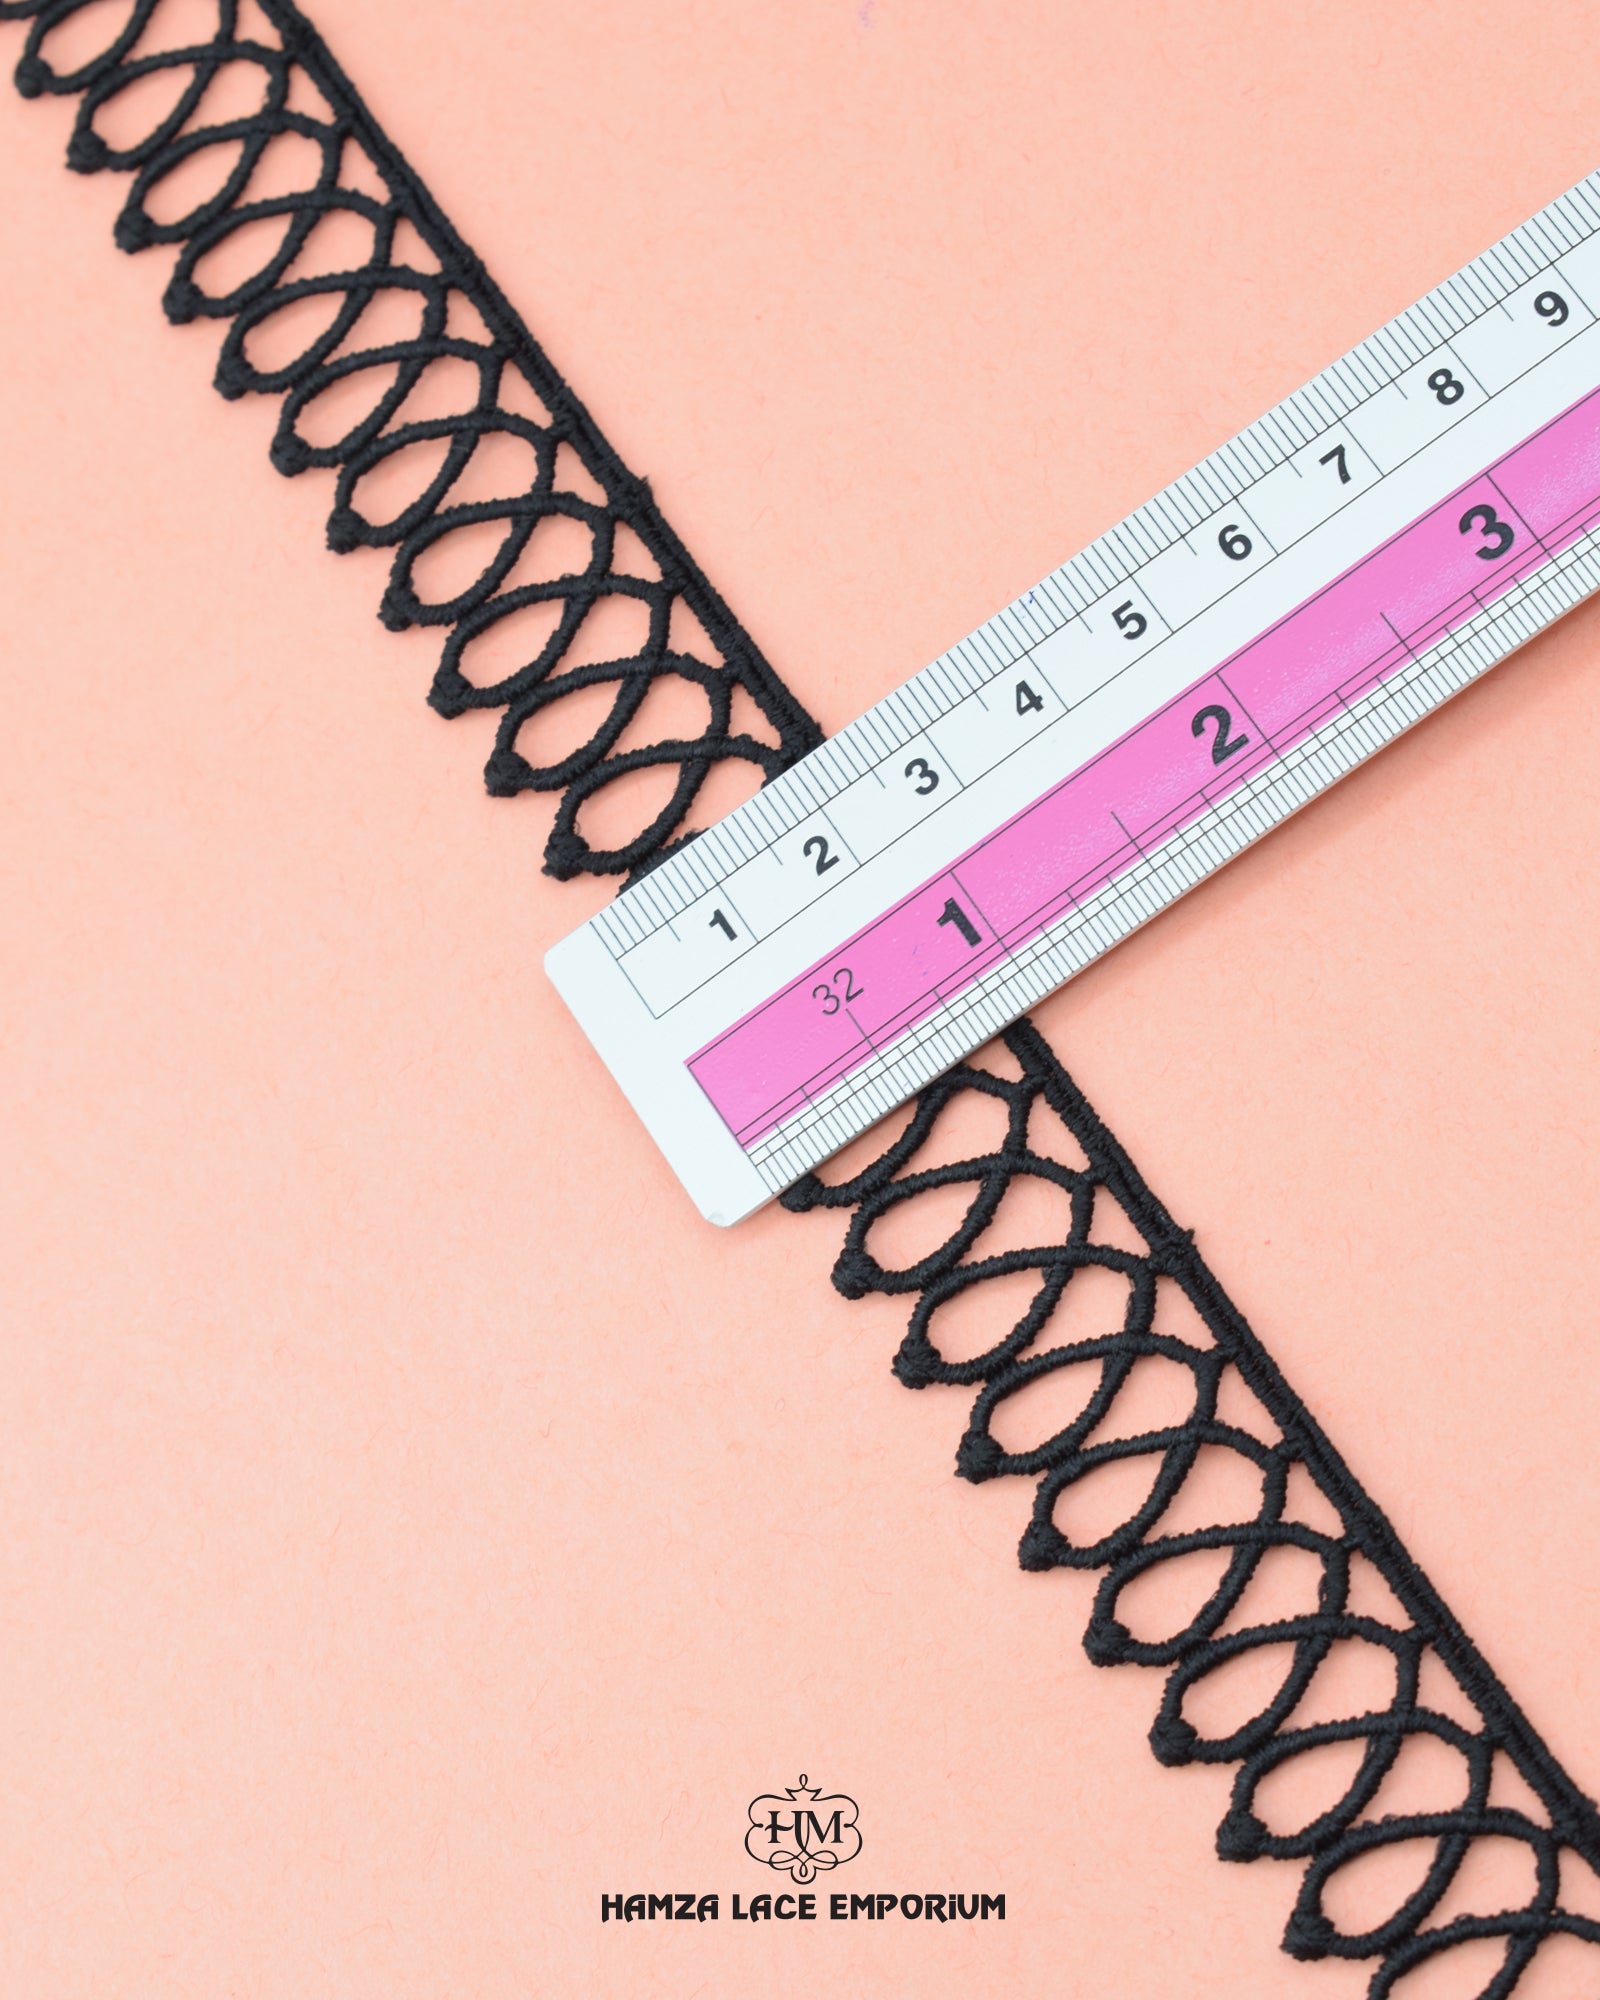 The size of the 'Edging Loop Lace 22628' is shown with the help of a ruler with the brand logo printed at the bottom